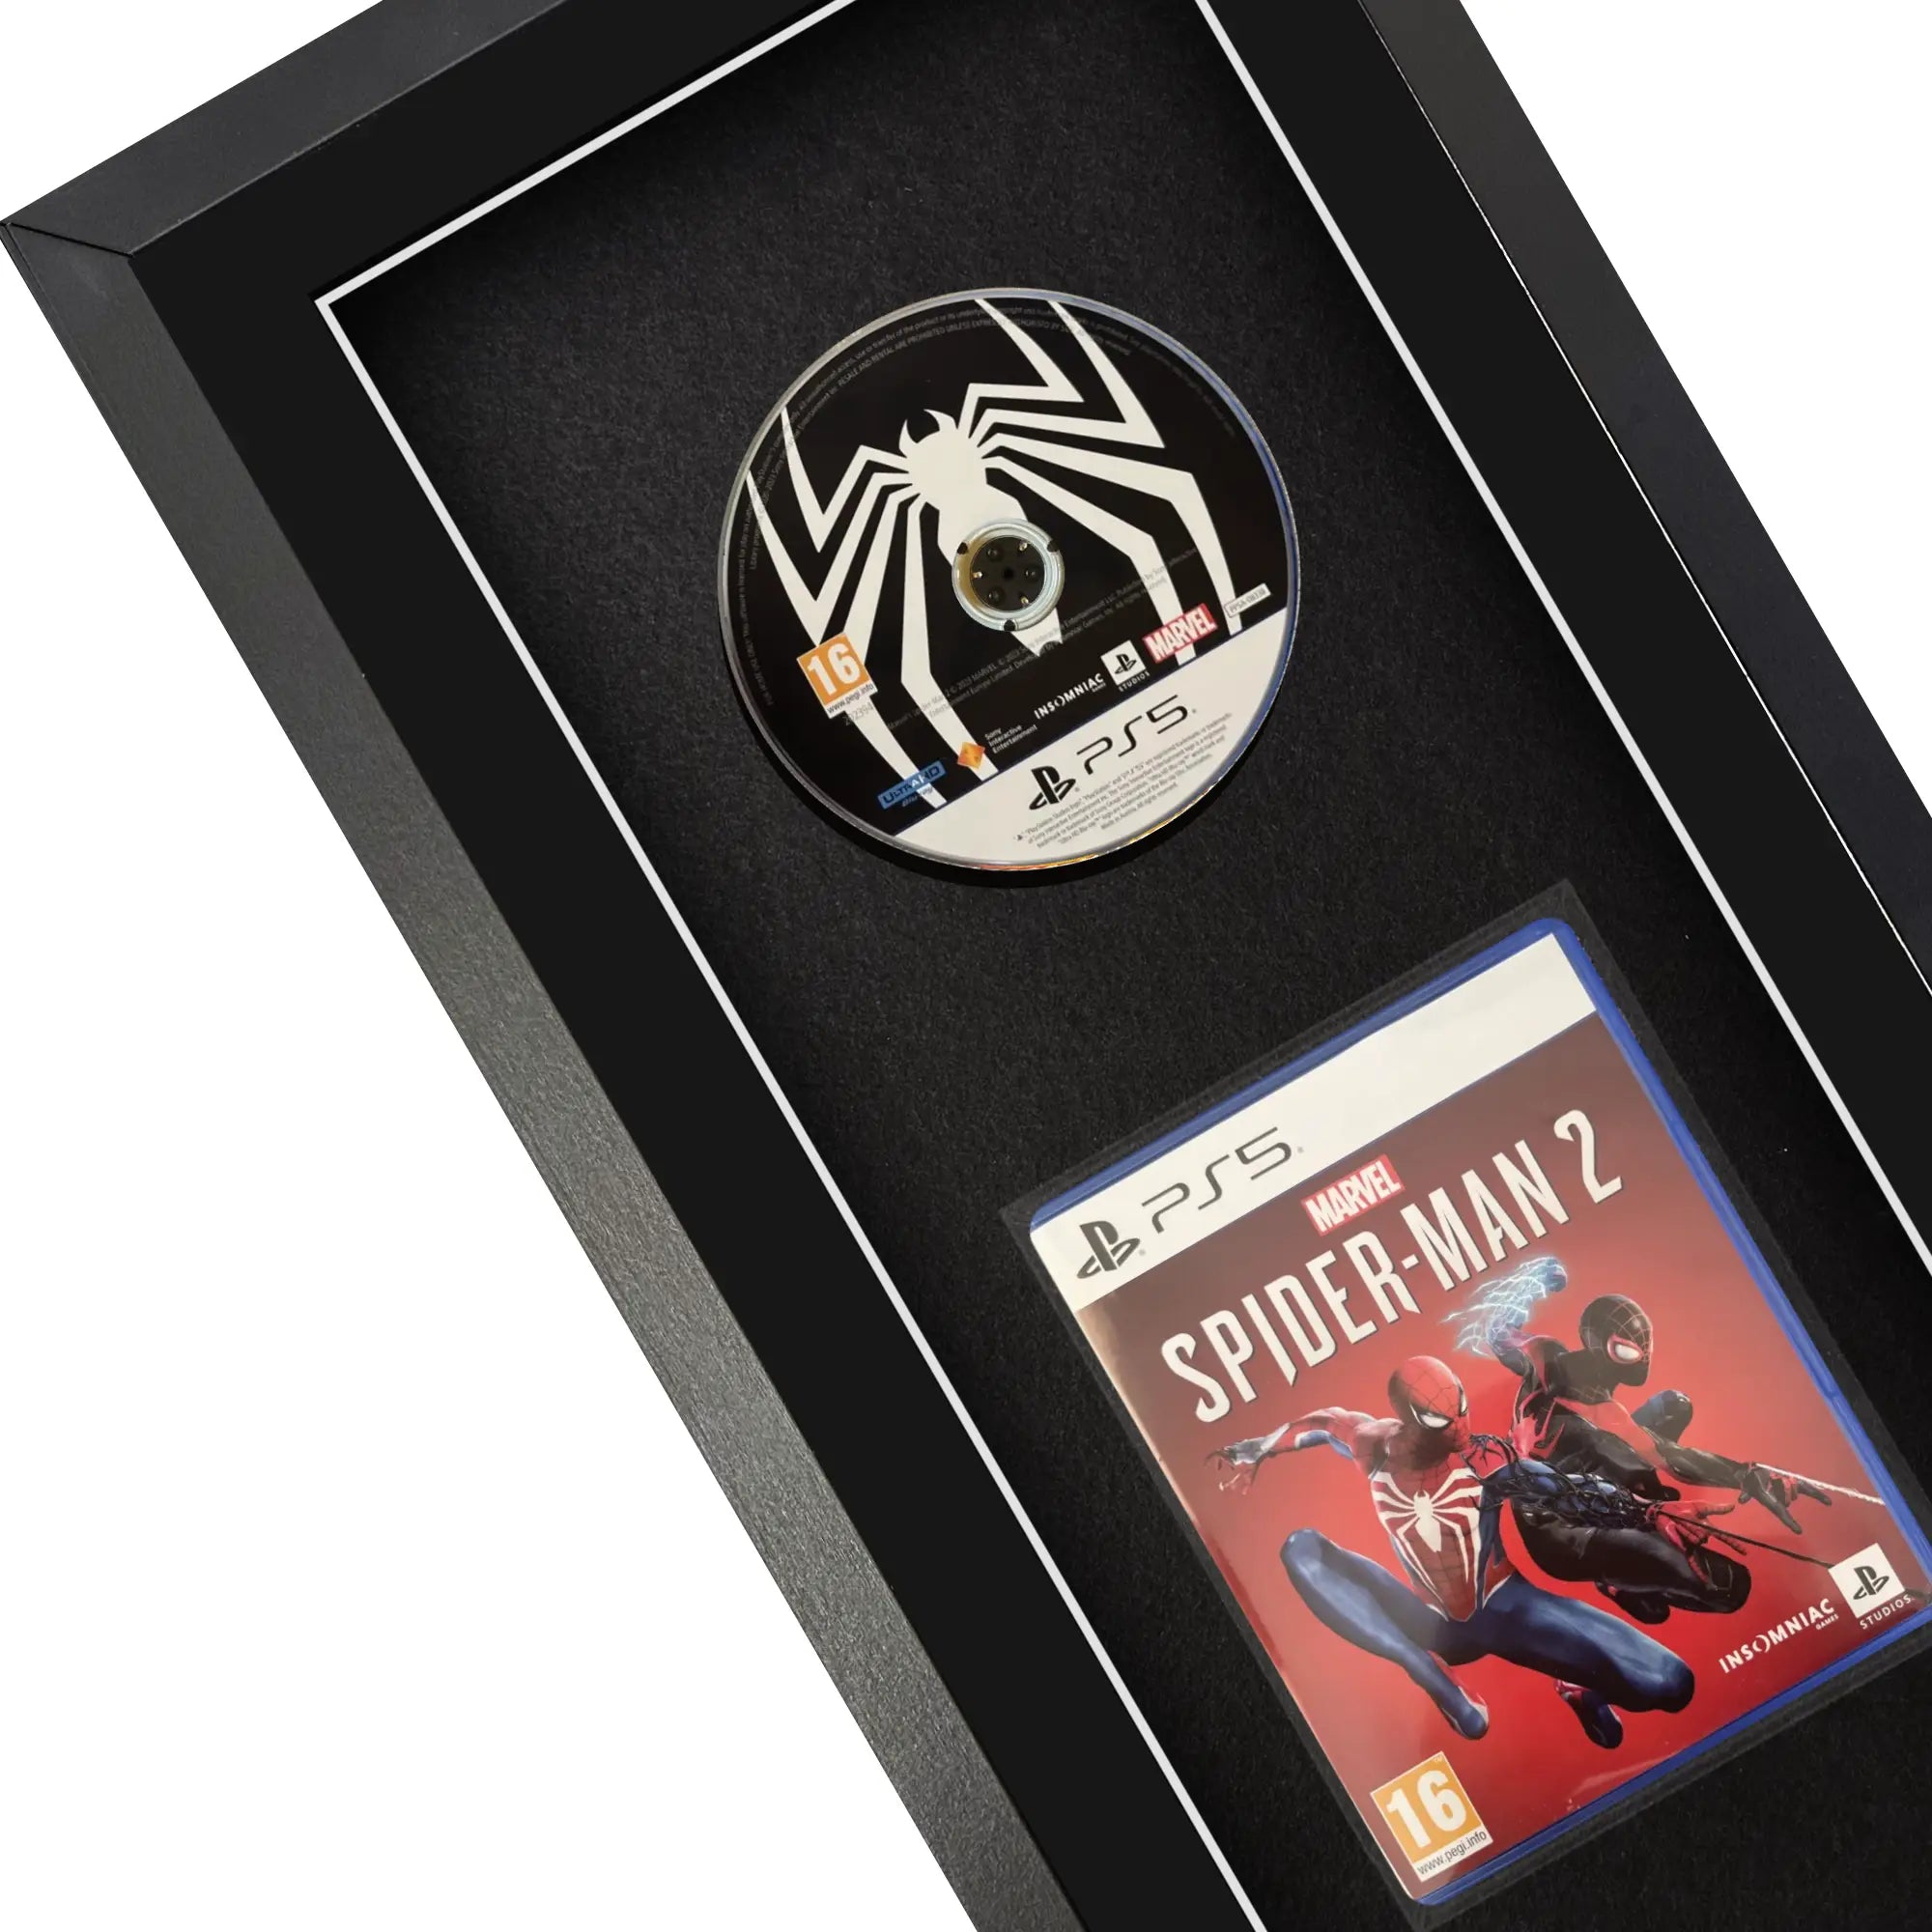 Frame your own PlayStation 5 game to be displayed within a frame, the perfect way to showcase your game